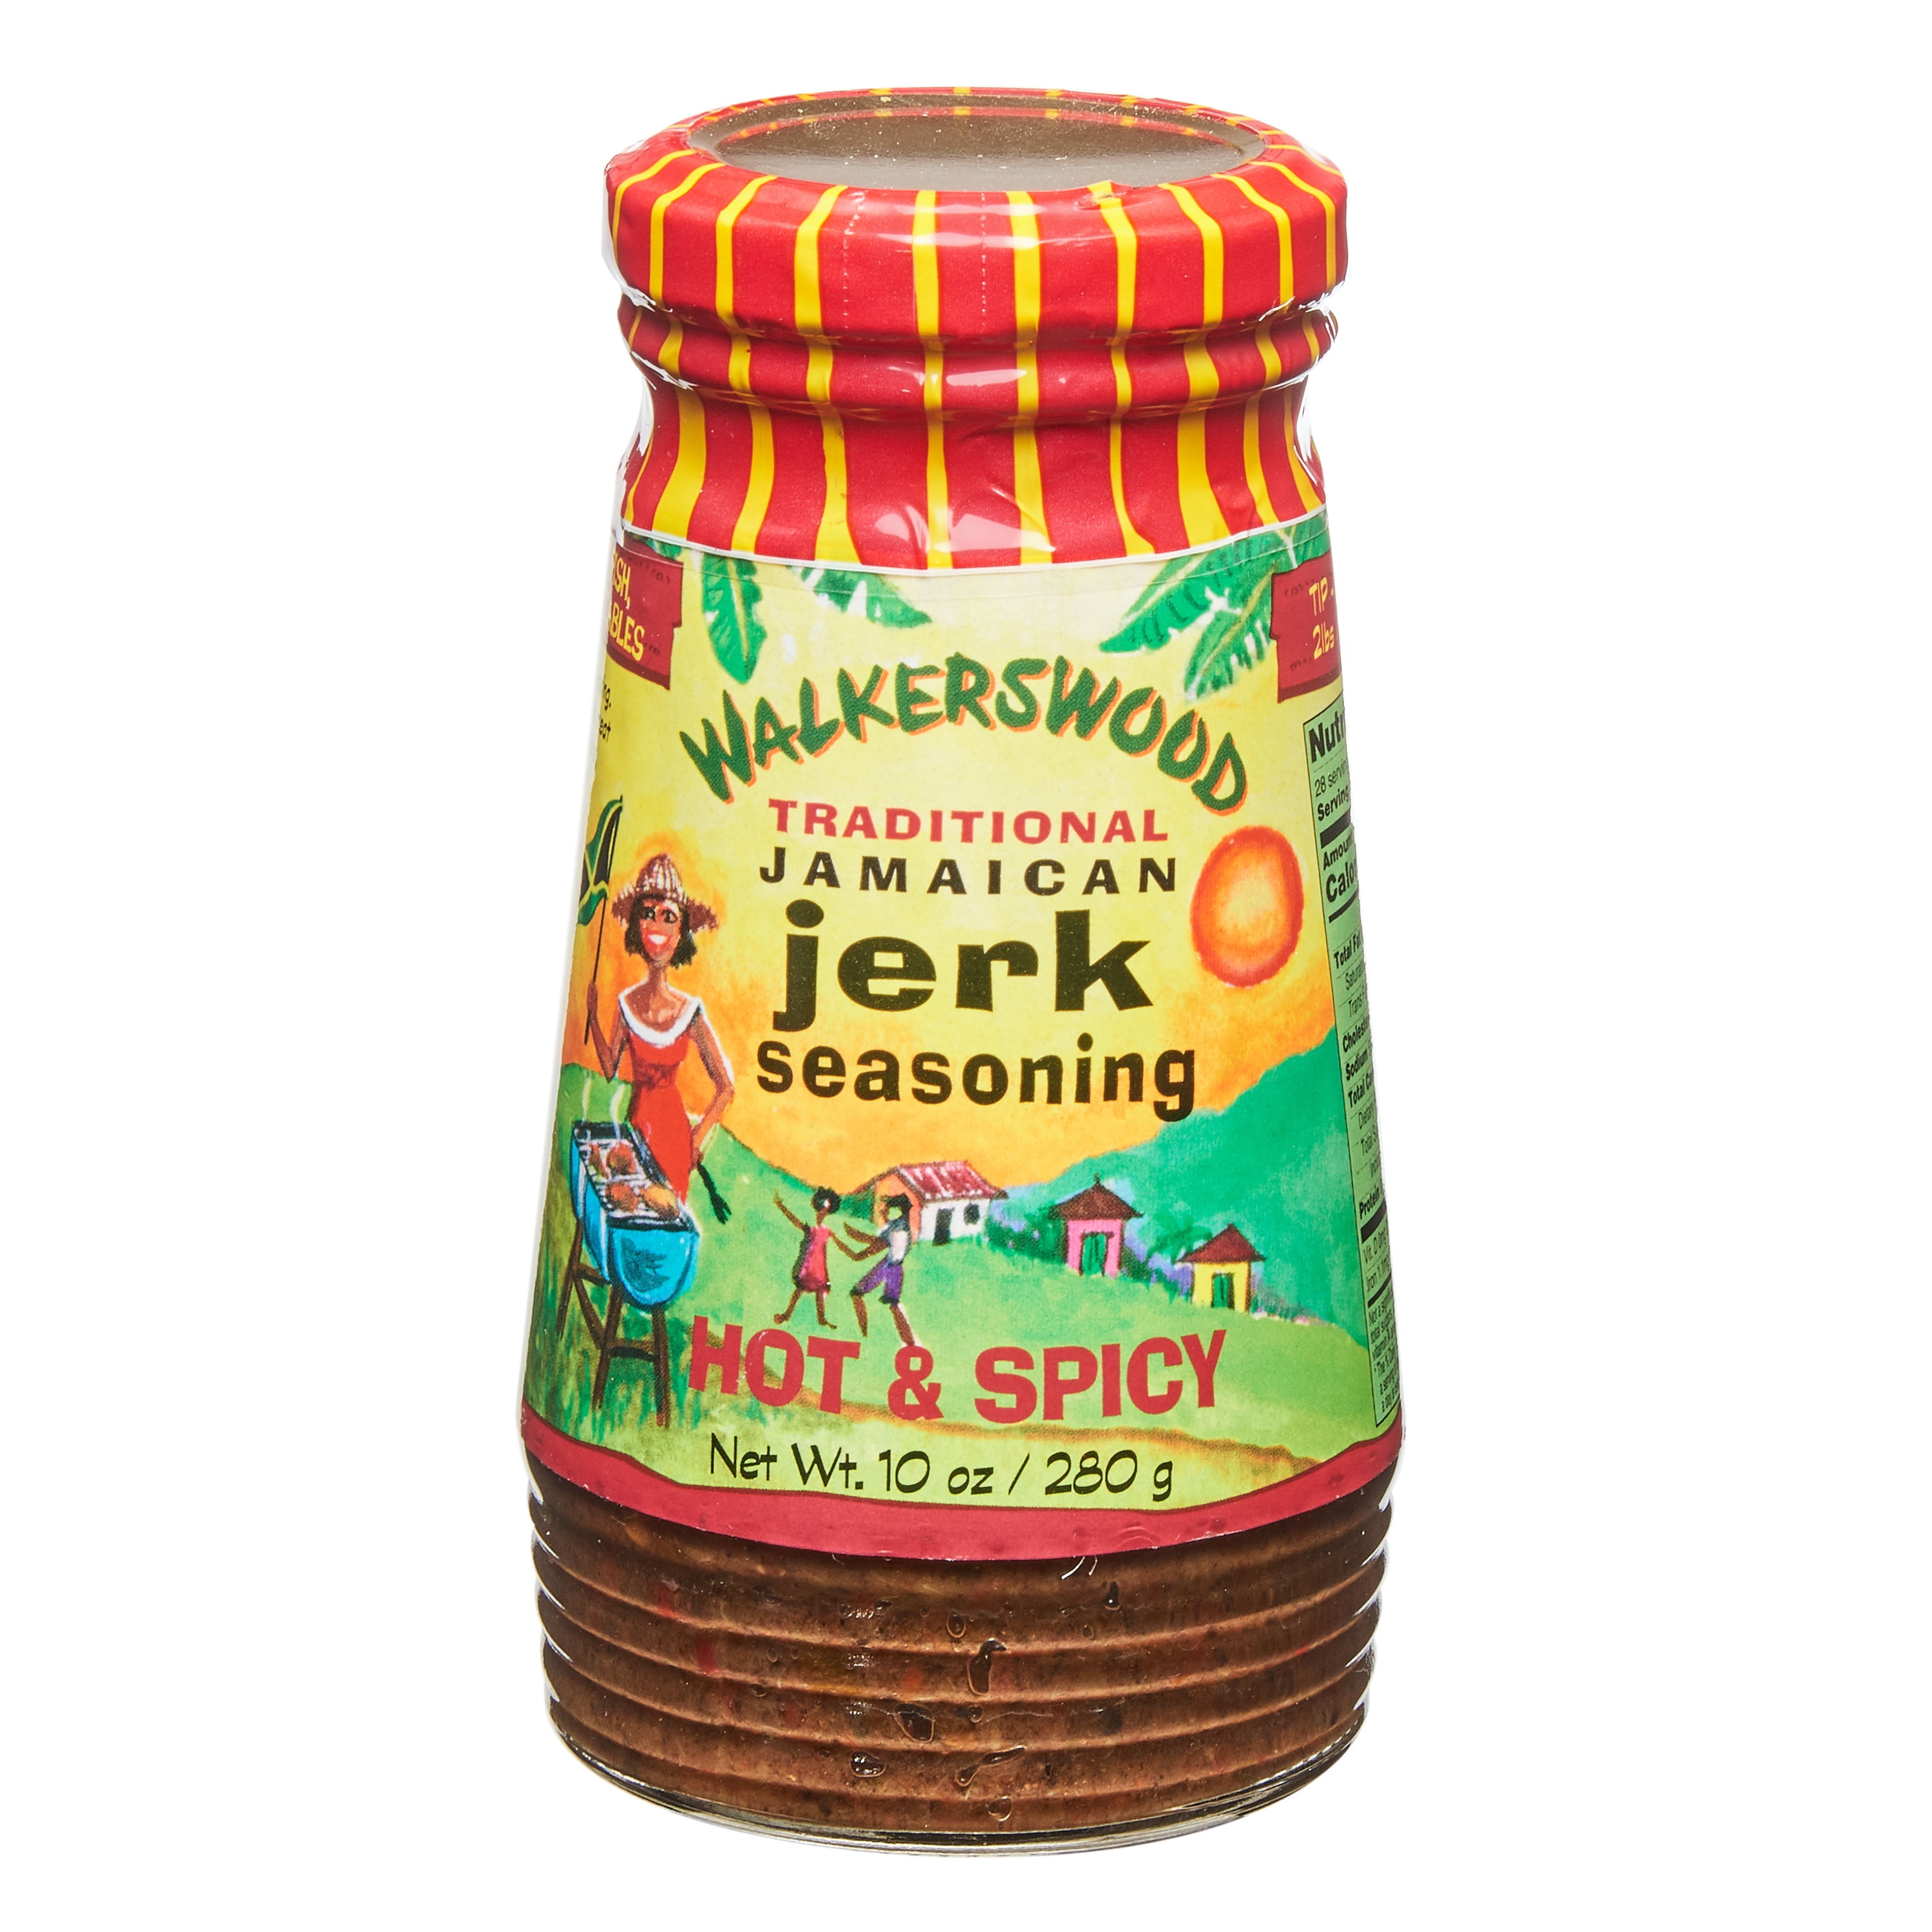 Walkerswood Traditional Jamaican Jerk Seasoning and Marinade, Hot & Spicy, 10 oz, 28 servings per container, Fat Free, Only 5 calories per serving, For chicken, pork, fish, hamburgers & vegetables.